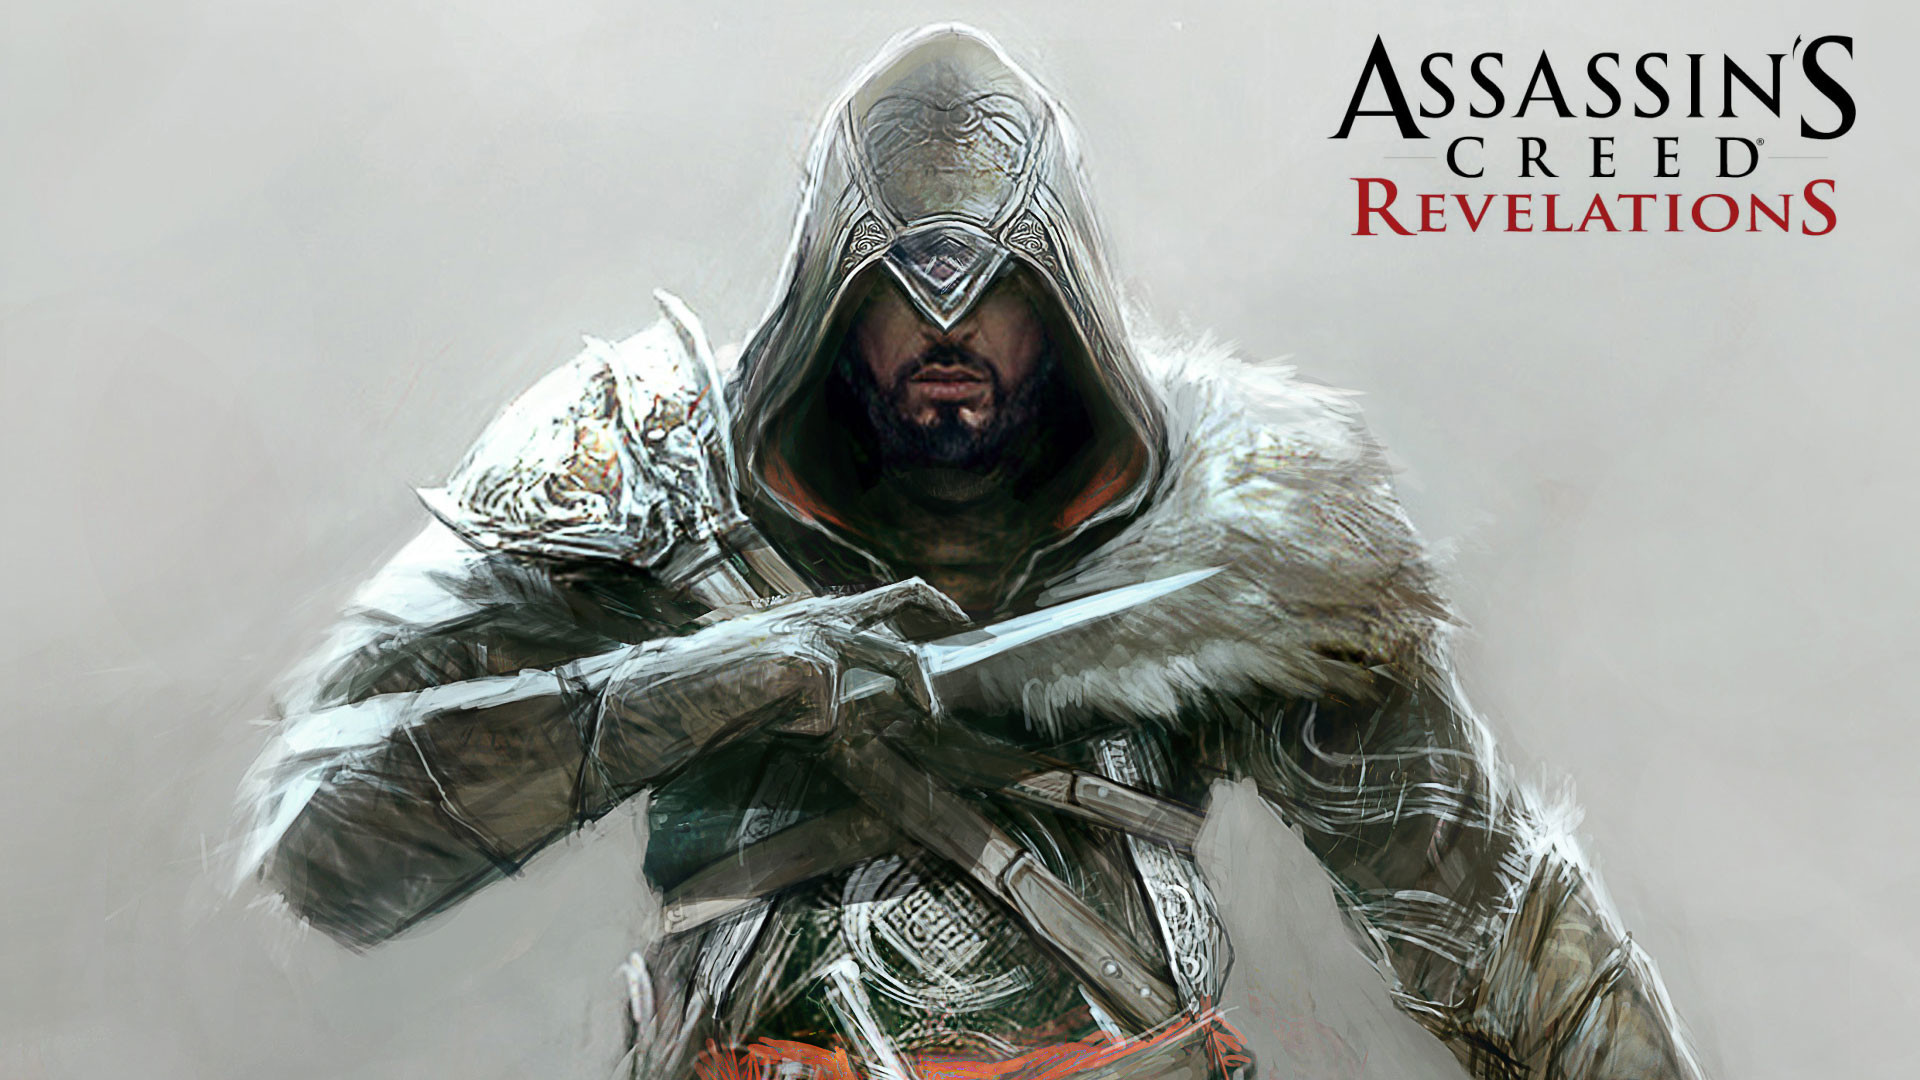 Assassins Creed Revelations Wallpapers in HD